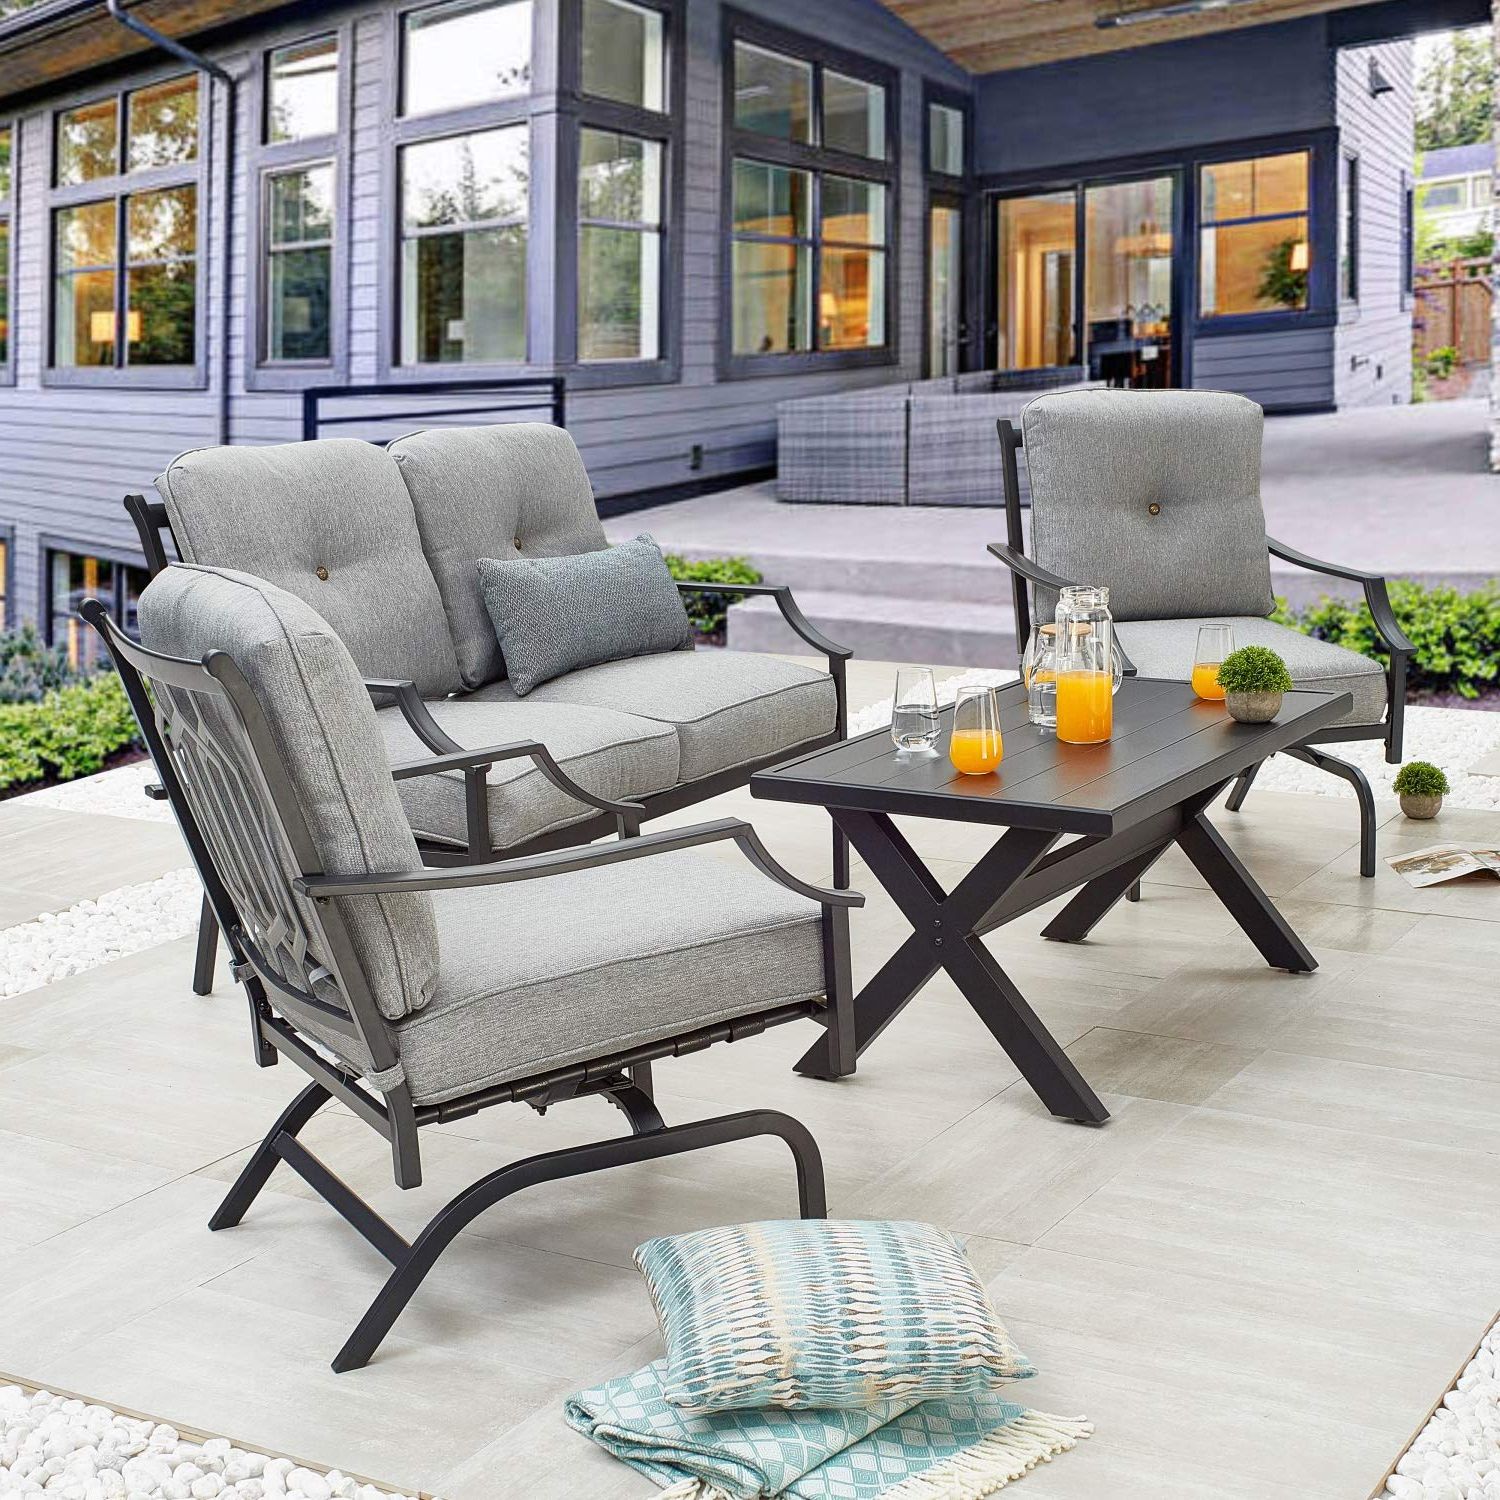 Cushioned Chair Loveseat Tables Inside Trendy Amazon: Patiofestival Patio Conversation Set Metal Outdoor Furniture  Sets All Weather Cushioned Loveseat & 2 Rocking Chairs & 1 Coffee Table For  Poolside Lawn Yard 4pcs : Patio, Lawn & Garden (View 3 of 15)